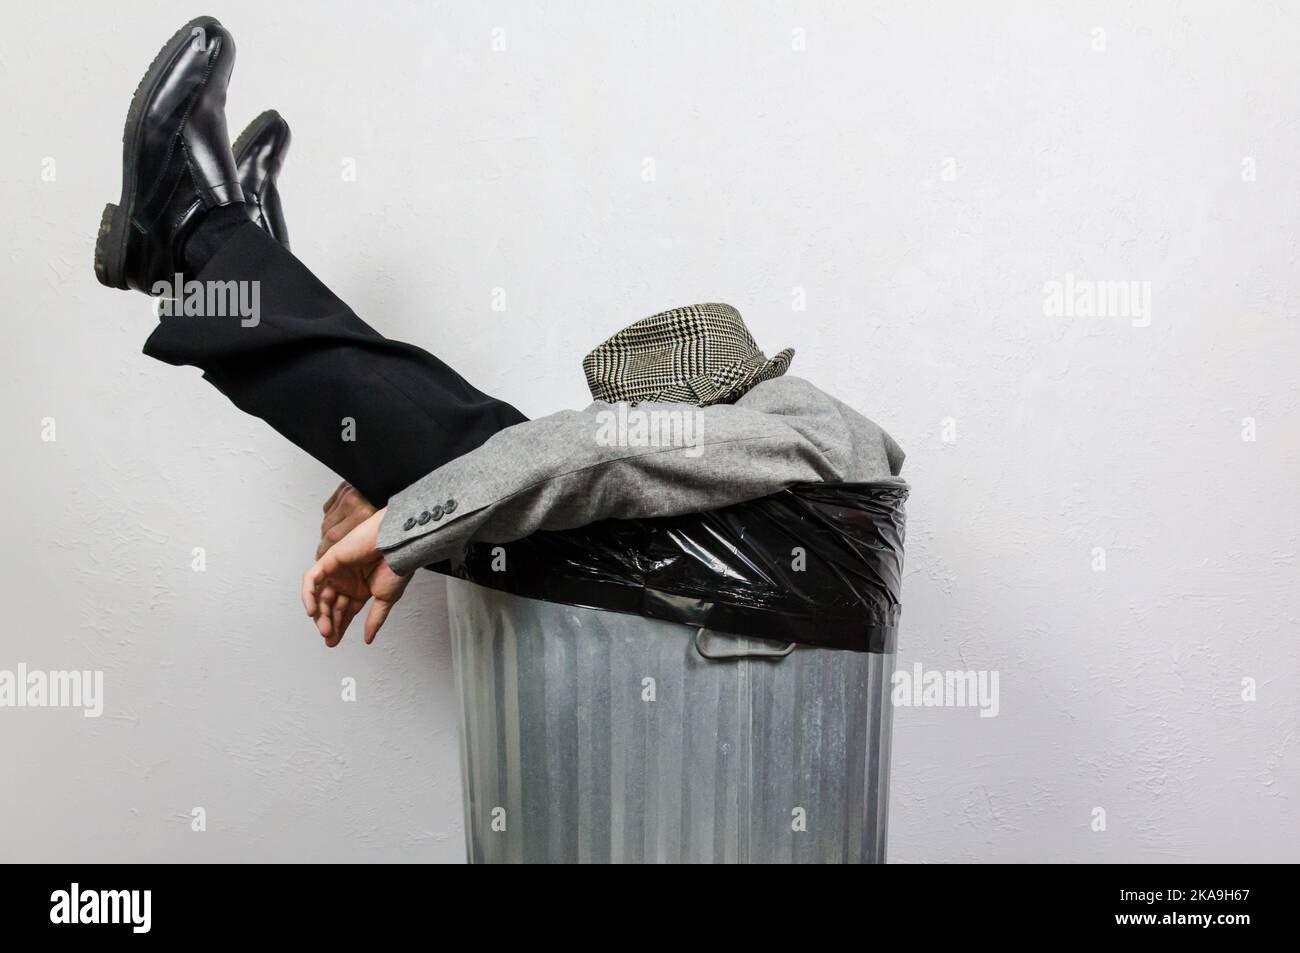 Portrait of Businessman in Suit and Fedora Hat Sitting in Trash Can. Man Thrown Away by Capitalism and Greed. Stock Photo